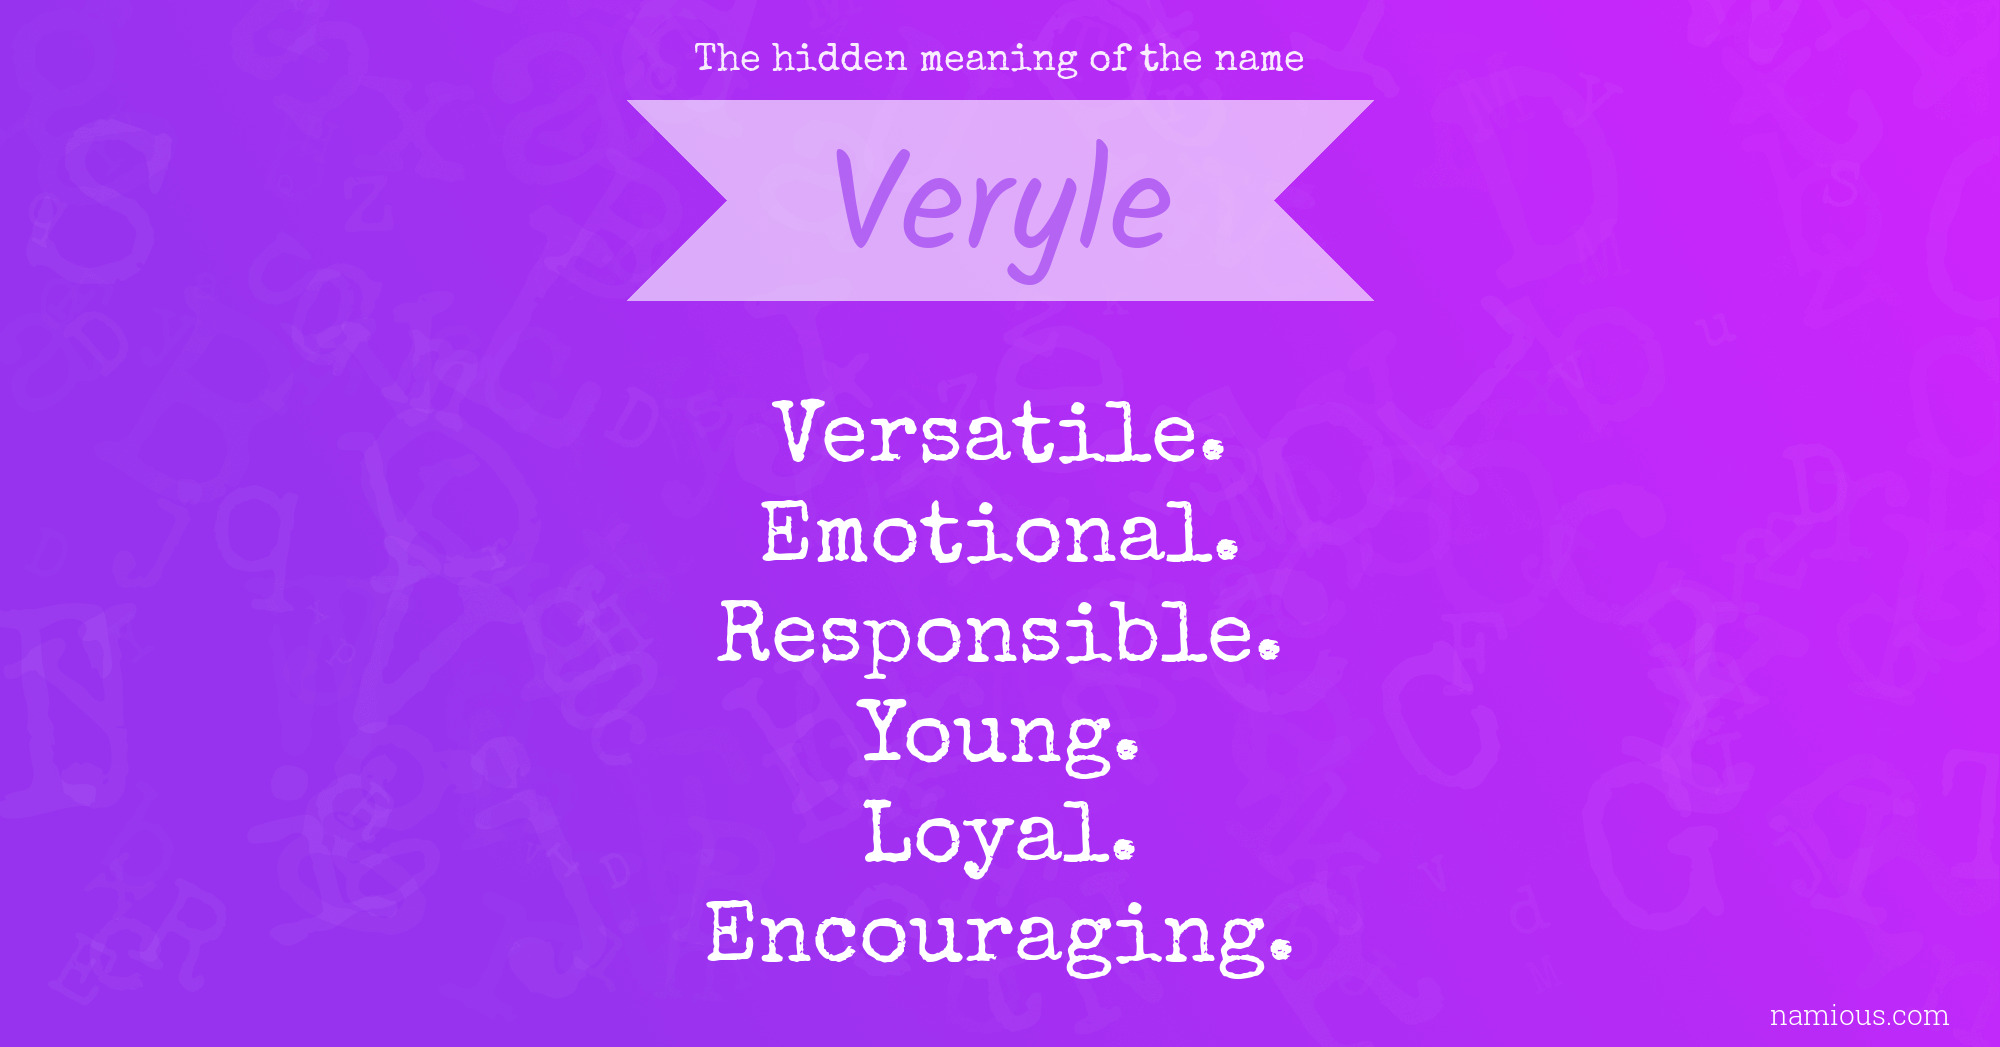 The hidden meaning of the name Veryle